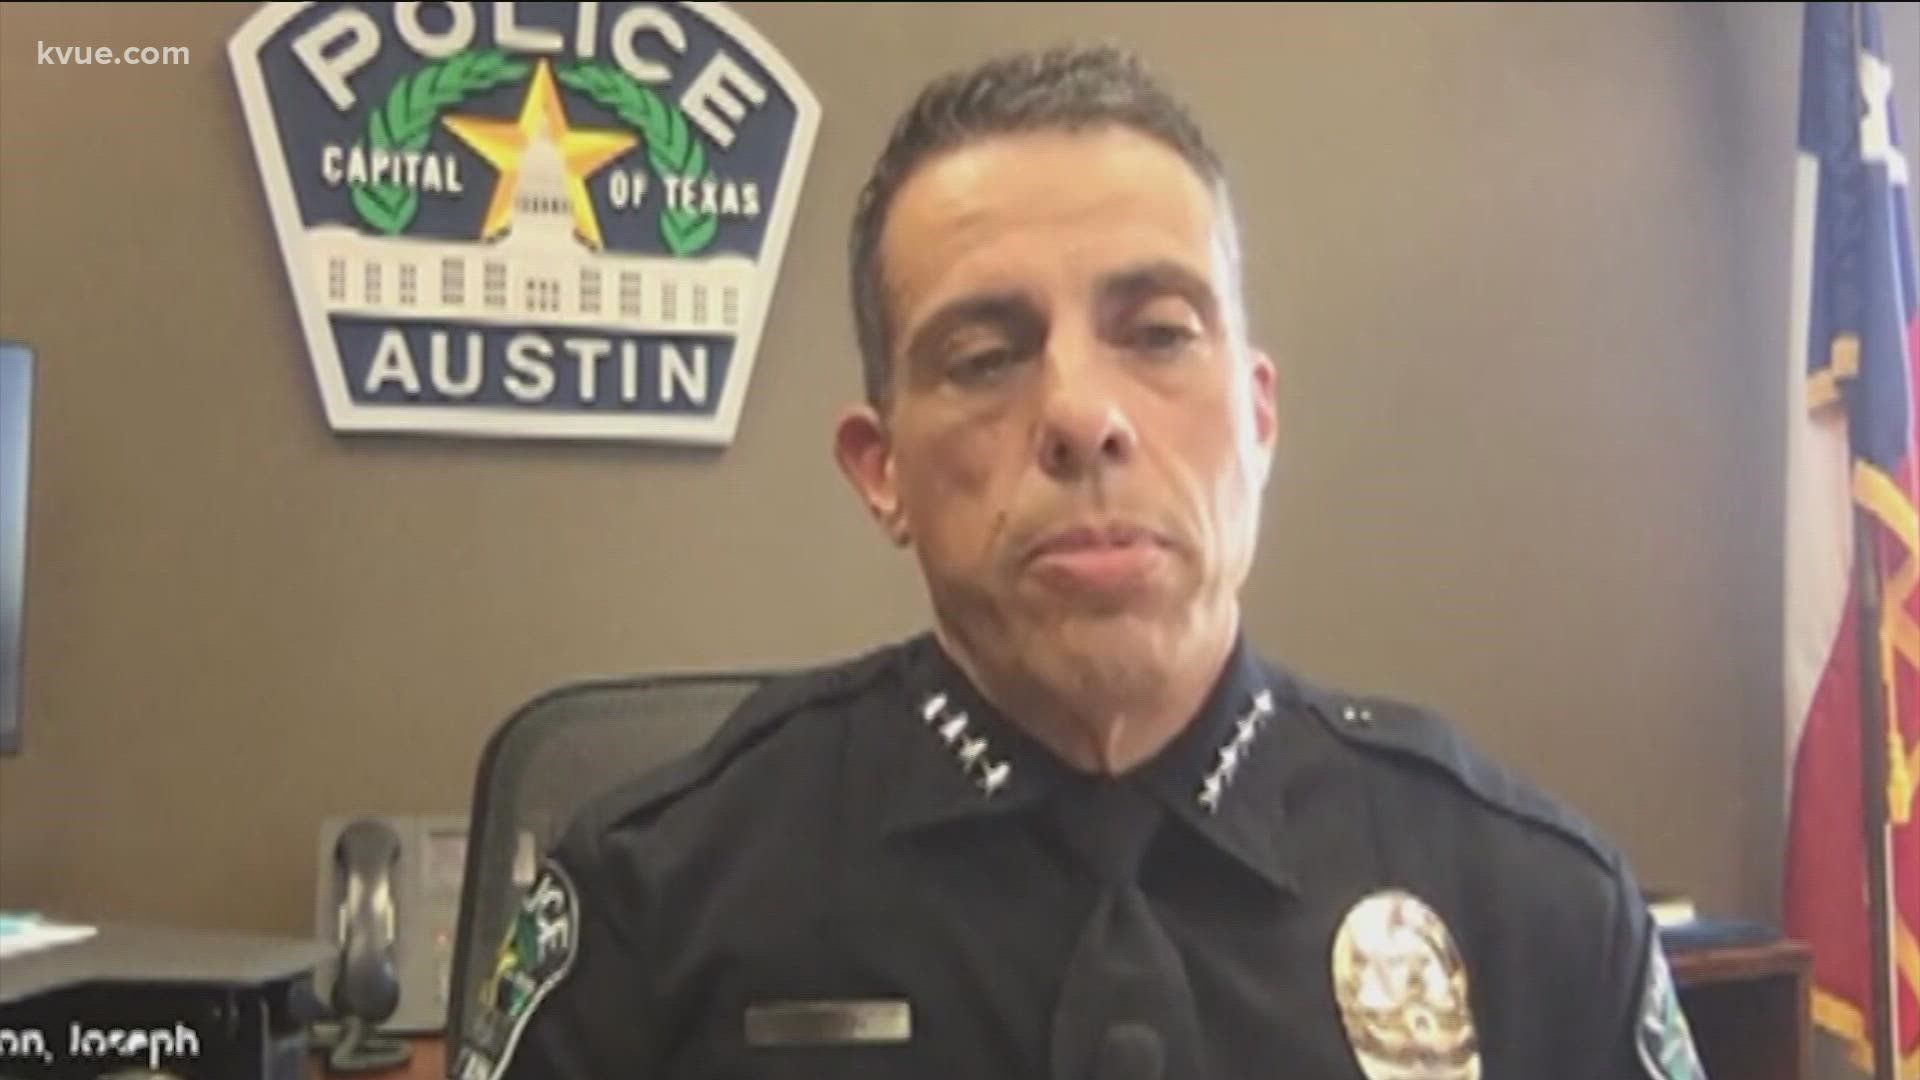 Starting this Friday, the Austin Police Department will change how it responds to non-emergency calls.